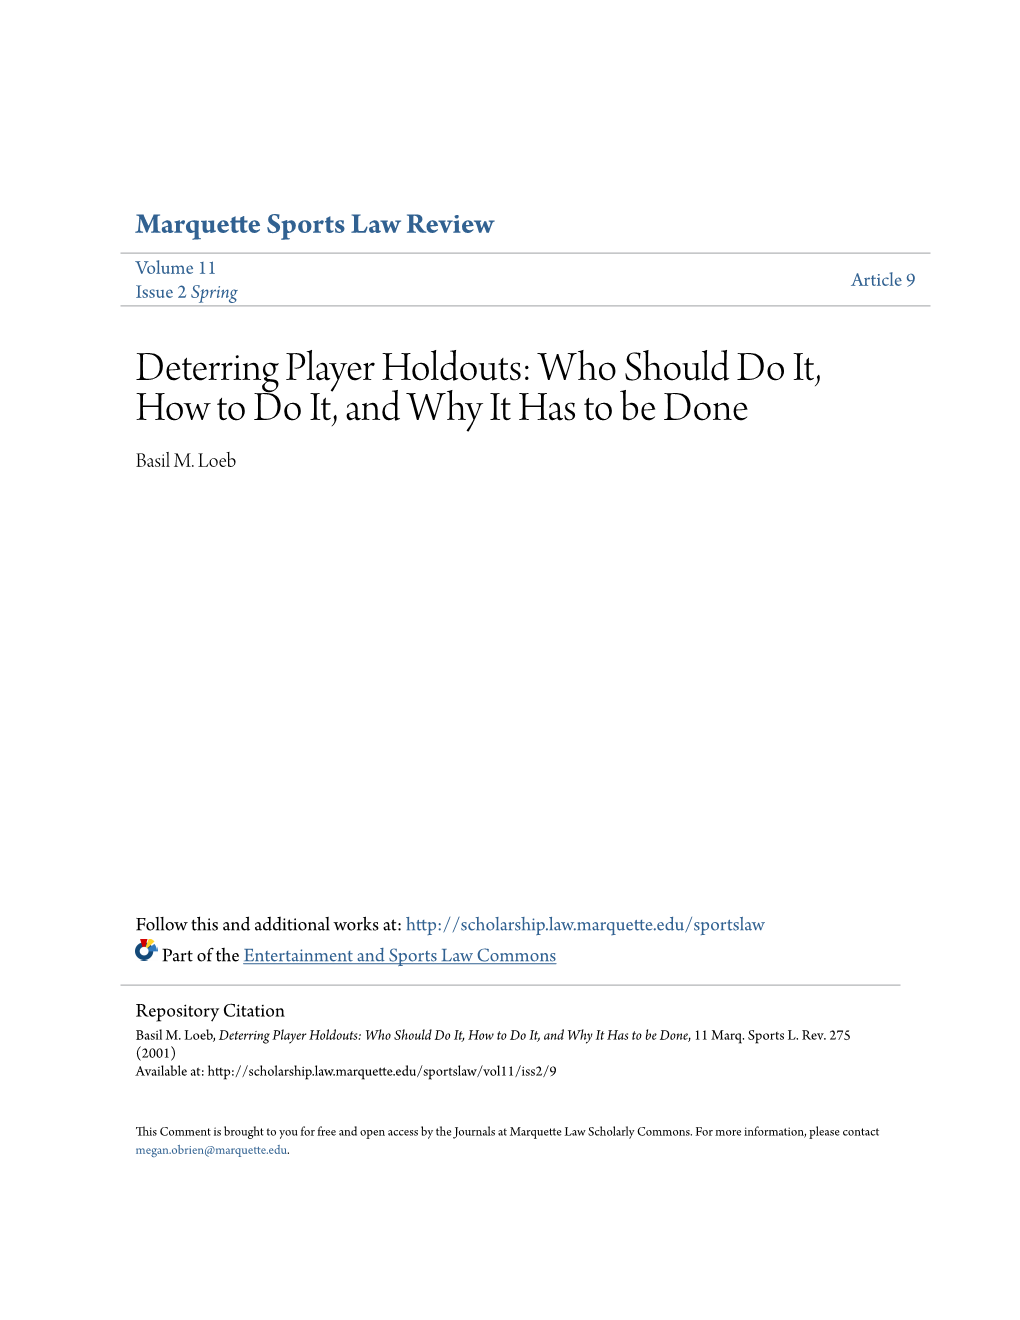 Deterring Player Holdouts: Who Should Do It, How to Do It, and Why It Has to Be Done Basil M